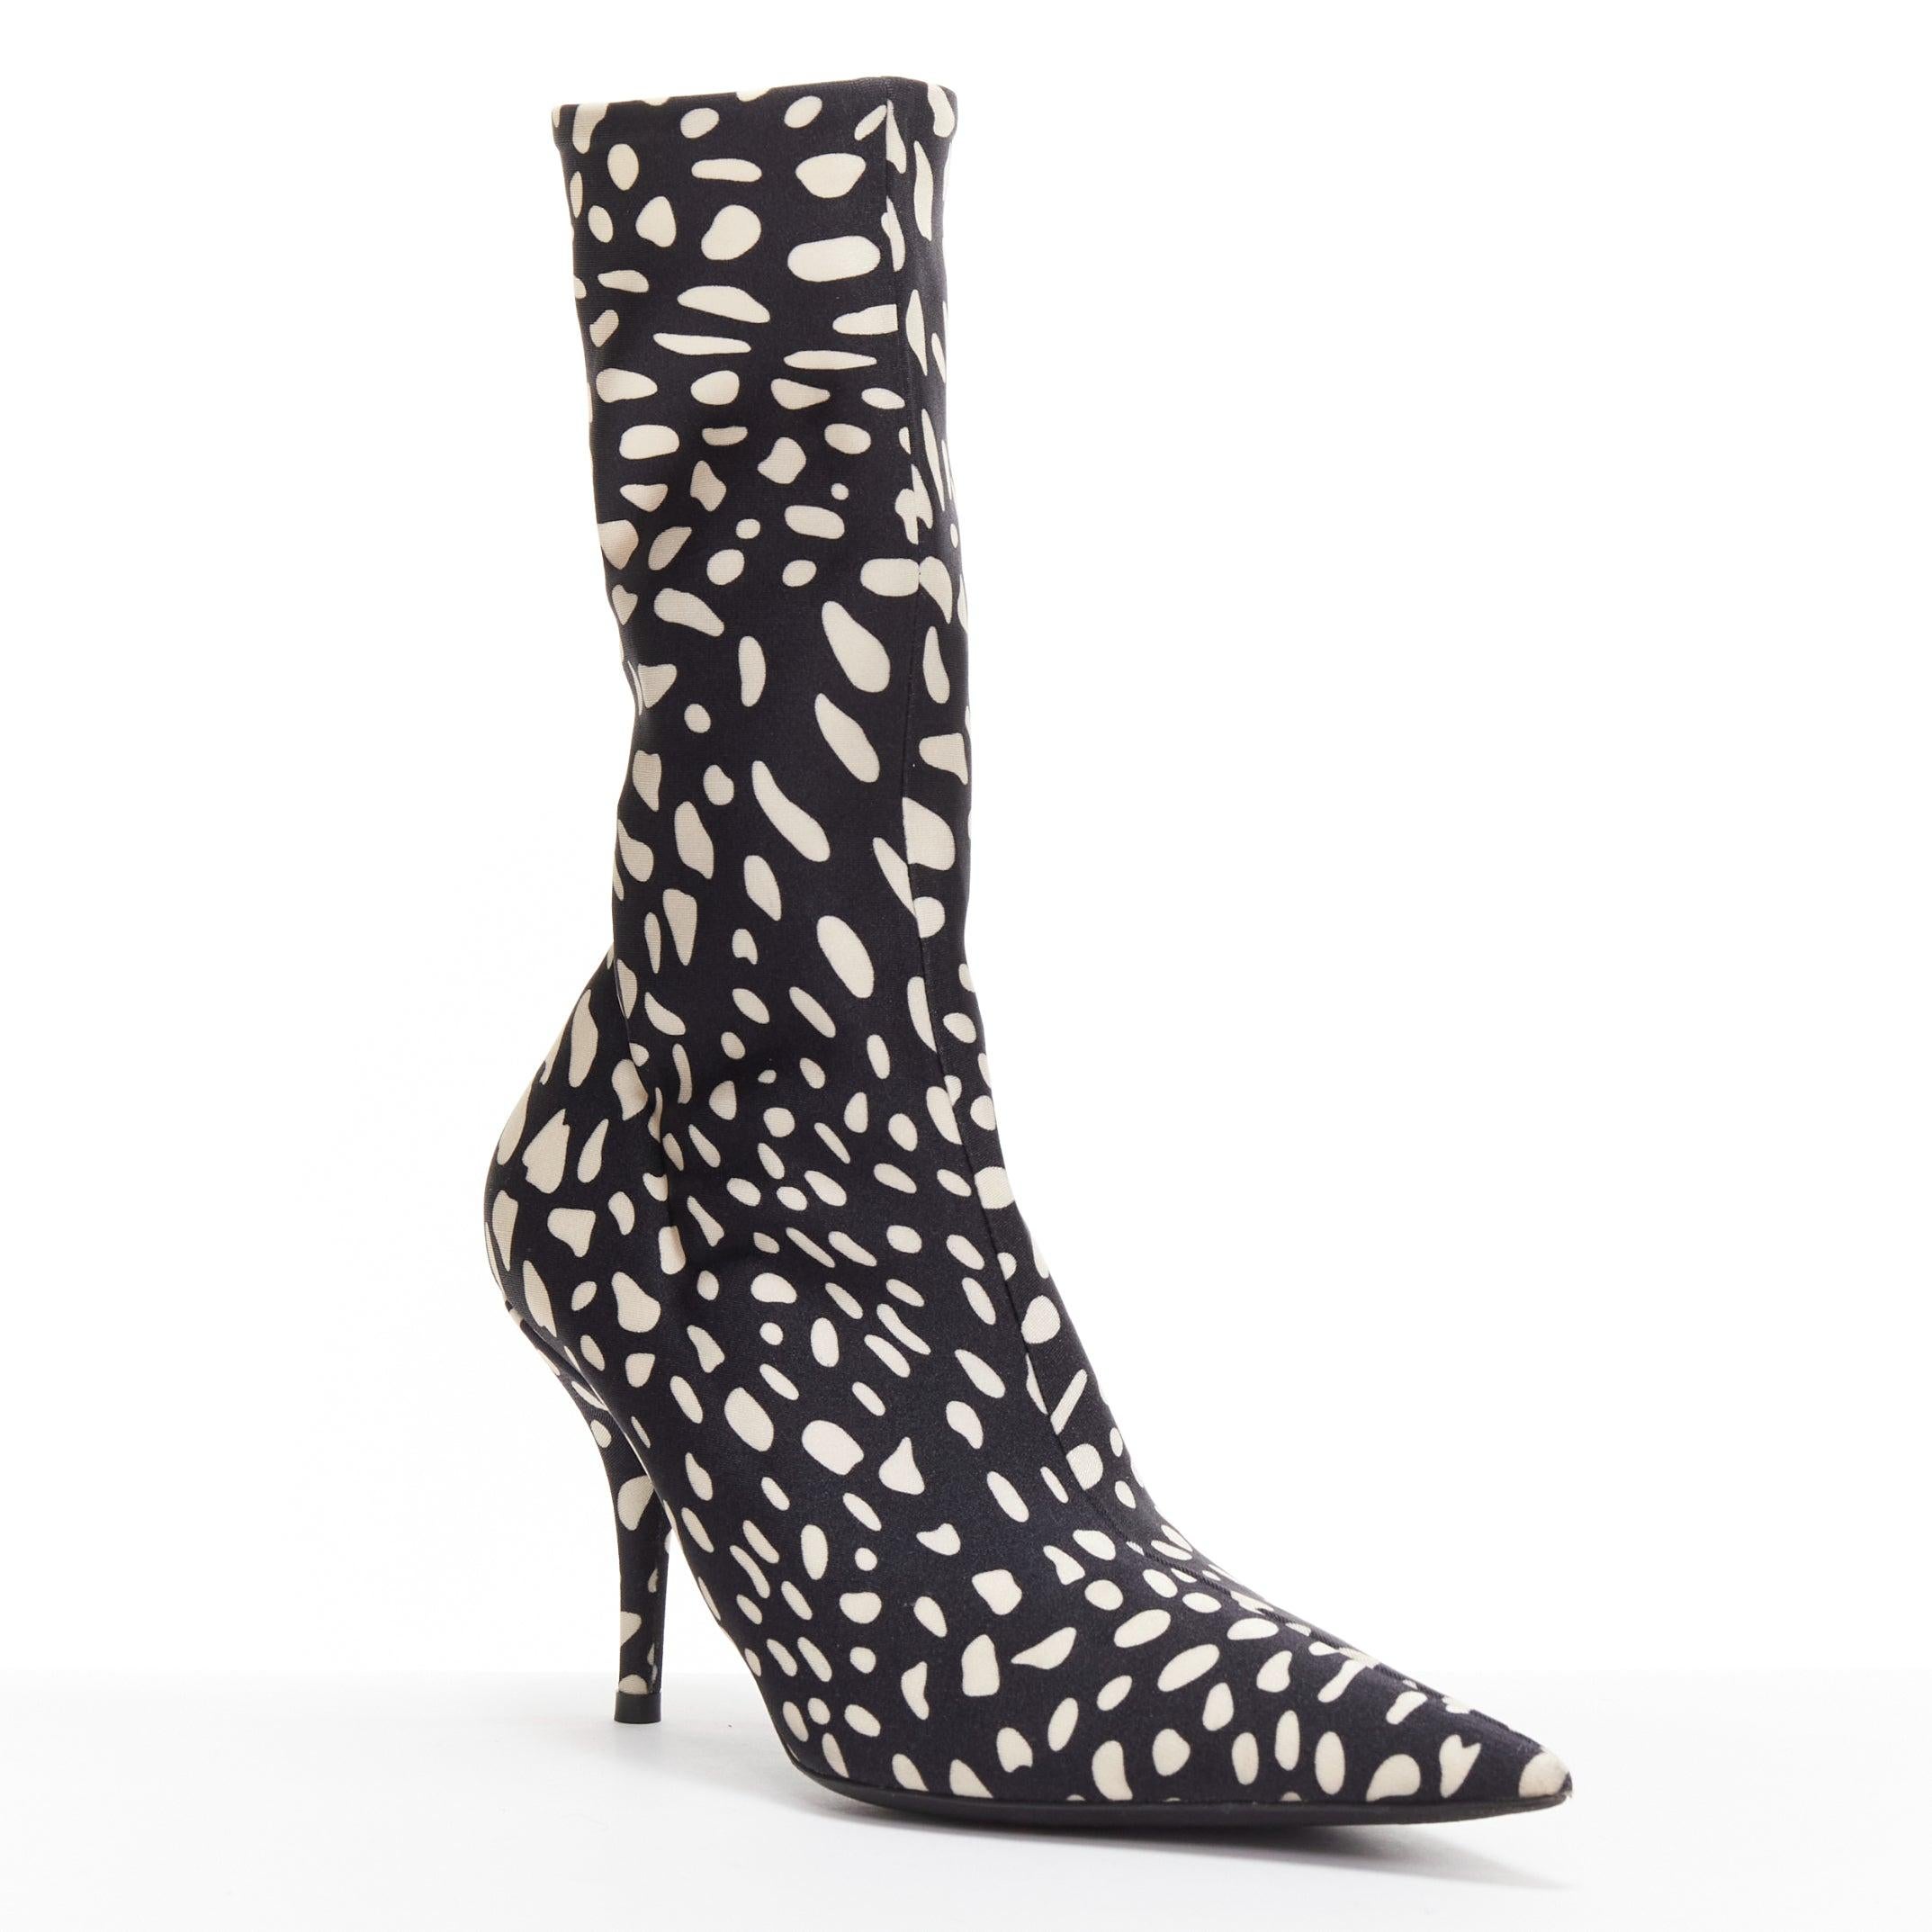 BALENCIAGA Knife black white spotted animal print lycra pointed sock boots EU38
Reference: BSHW/A00180
Brand: Balenciaga
Designer: Demna
Model: Knife
As seen on: Kylie Jenner
Material: Fabric
Color: White, Black
Pattern: Animal Print
Closure: